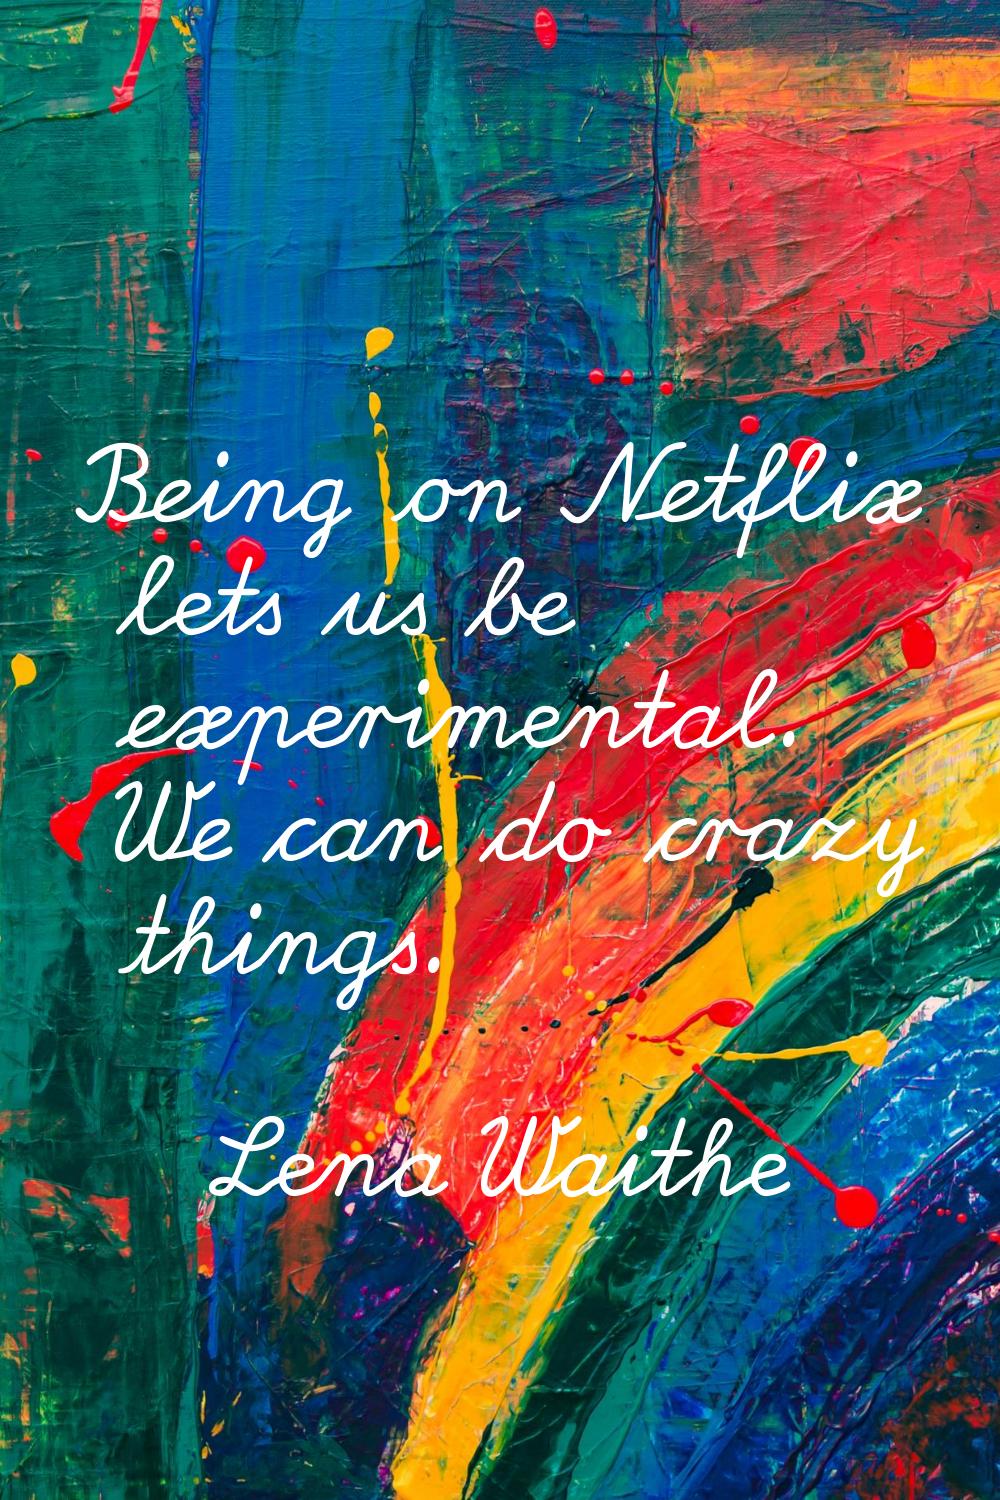 Being on Netflix lets us be experimental. We can do crazy things.